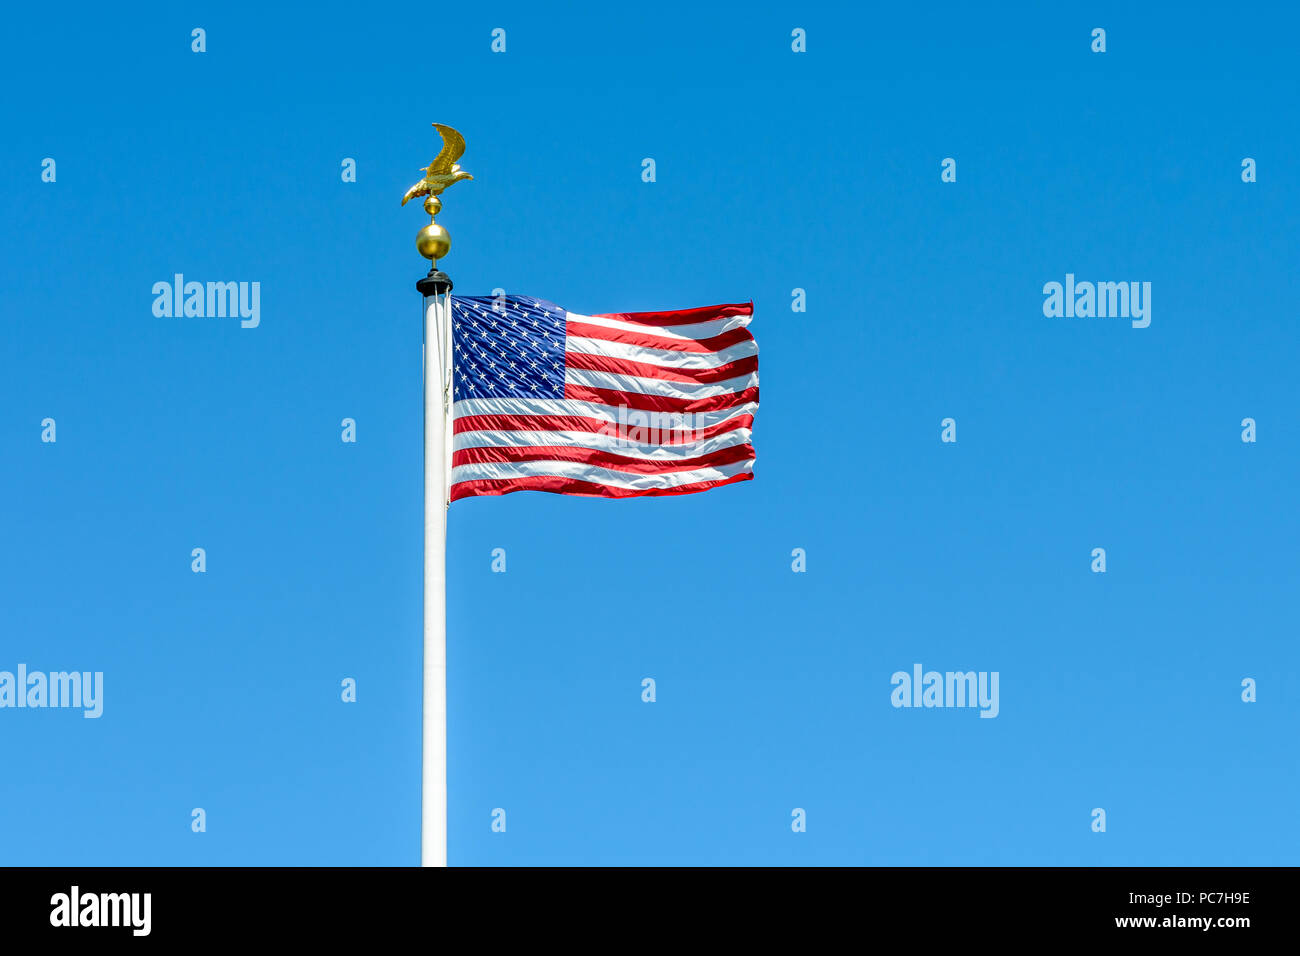 The flag of the United States of America blowing in the wind at full-mast on a white pole topped with a golden eagle on ball against blue sky. Stock Photo